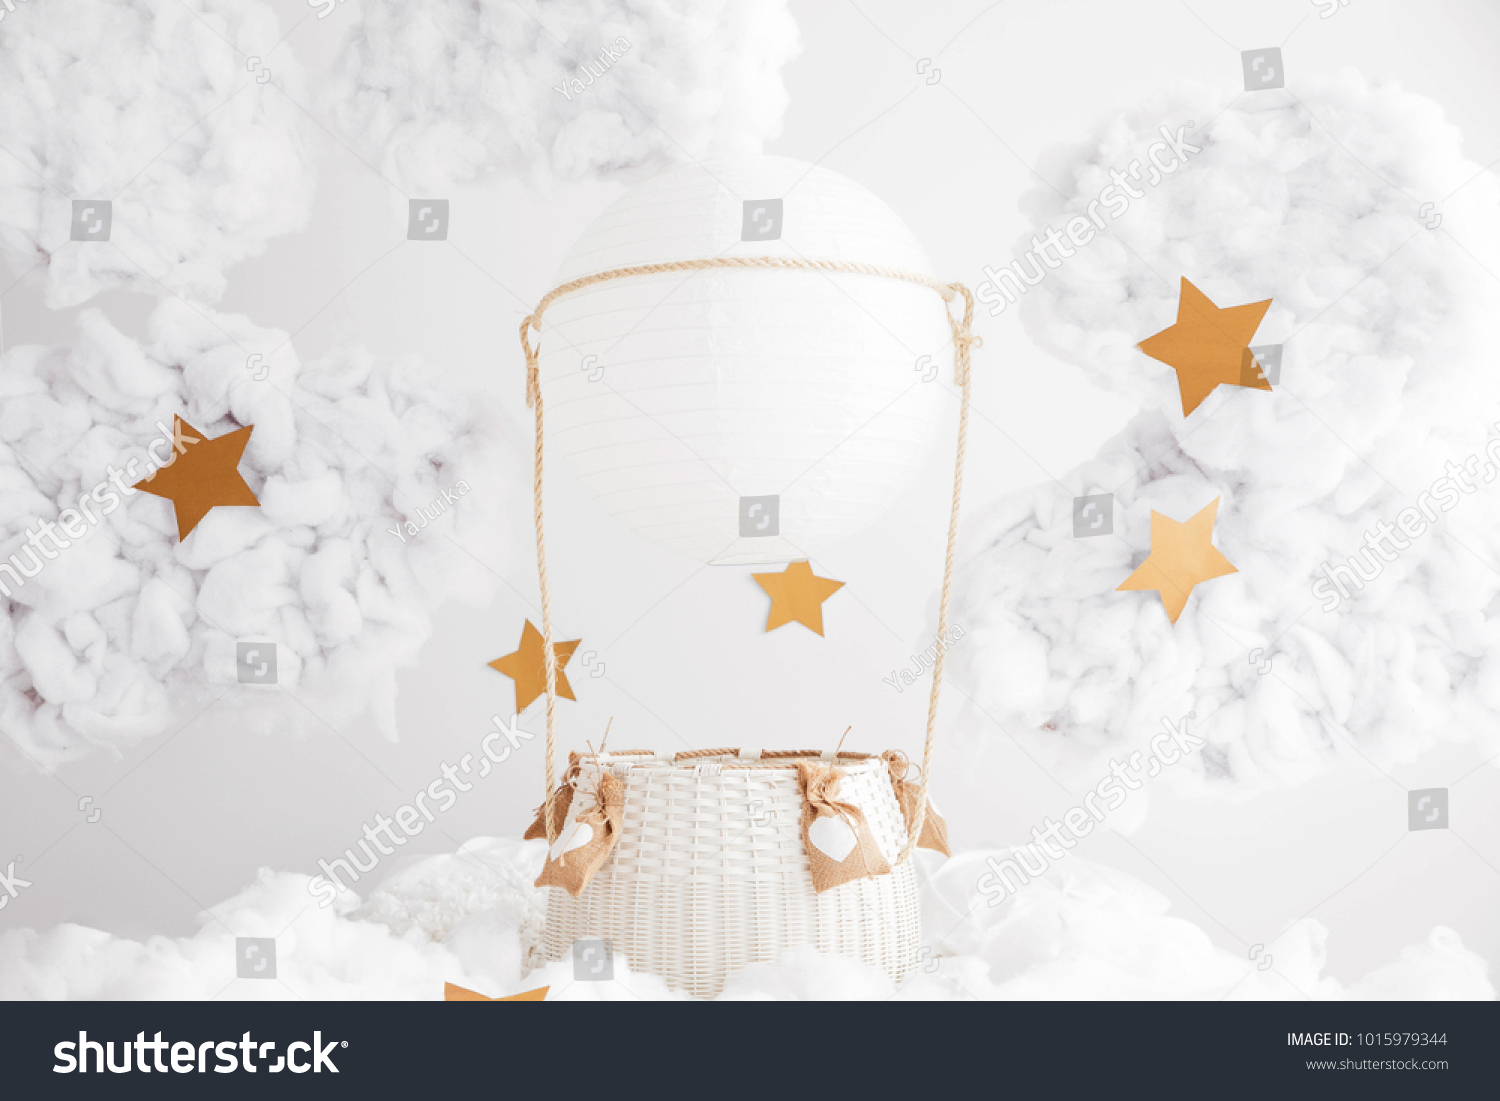 Digital background for newborn and children photography. White hand made air balloon in the clouds with the stars. White clouds. Valentines day decorations. #1015979344